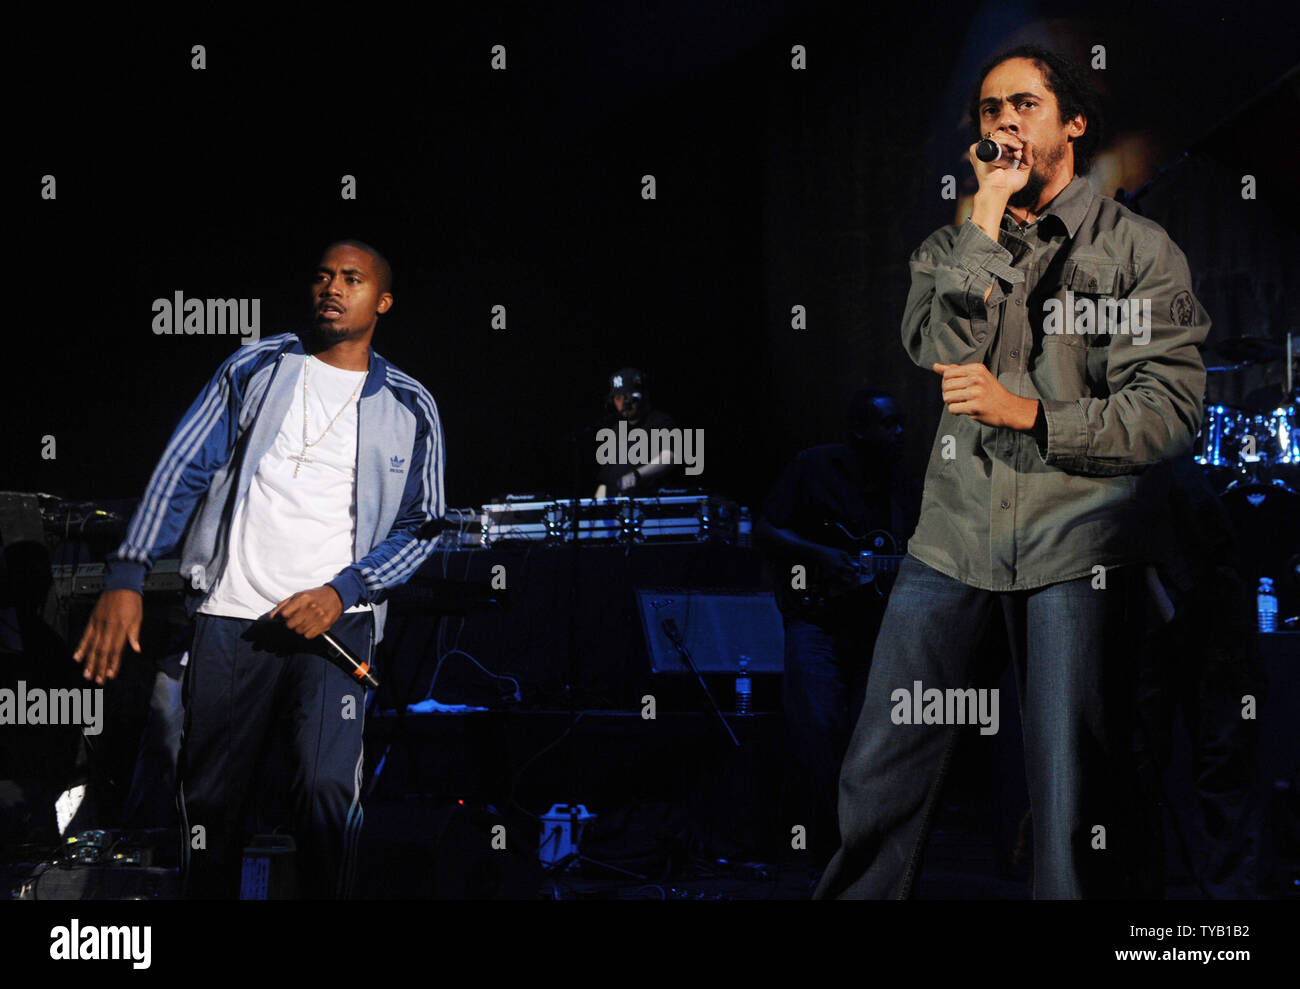 American rapper Nas and Jamaican reggae artist Damian Jr Gong Marley perform at Hammersmith Apollo in London on July 20, 2010.     UPI/Rune Hellestad Stock Photo